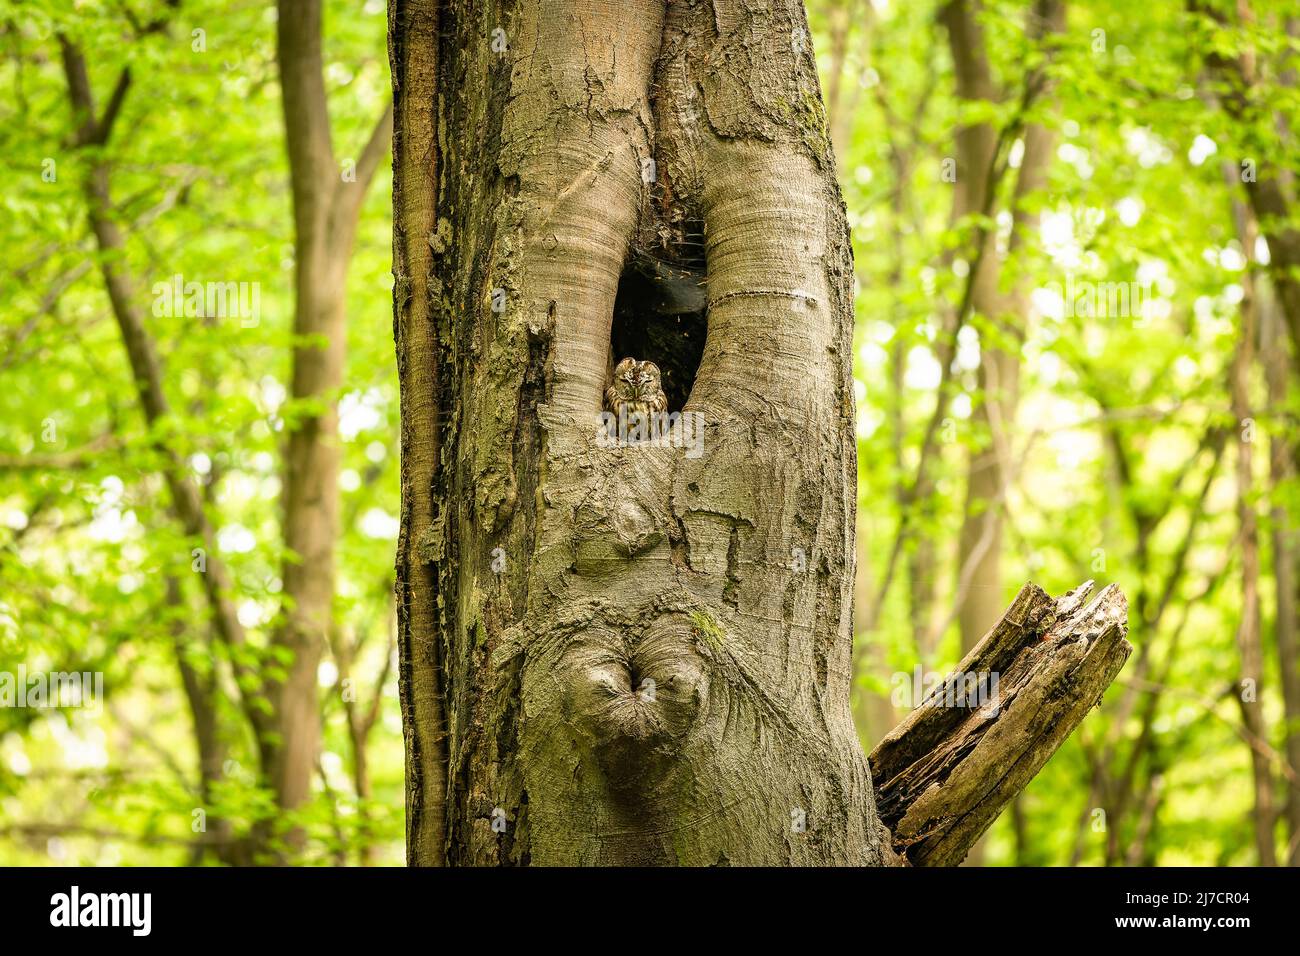 The small brown tawny owl sitting and sleeping in a cavity in an old tree trunk. Mixed forest with beech trees and fresh green leaves in the backgroun Stock Photo